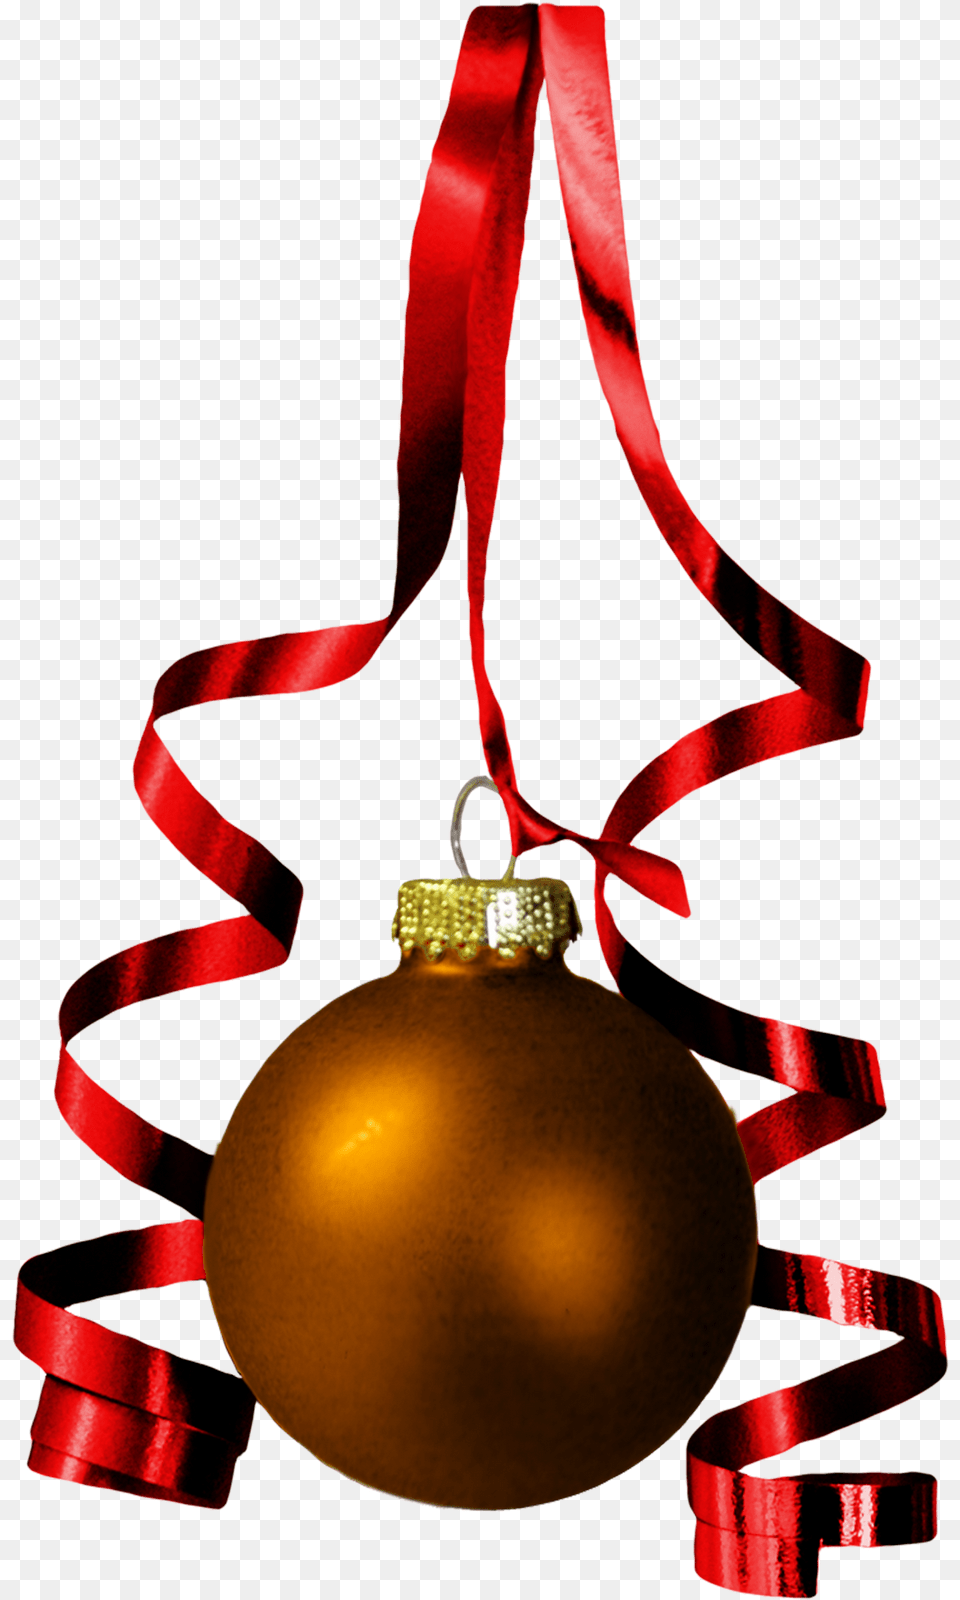 Natal Recorte Grtis Christmas Ornaments Transparent Background, Accessories, Gold, Ornament Png